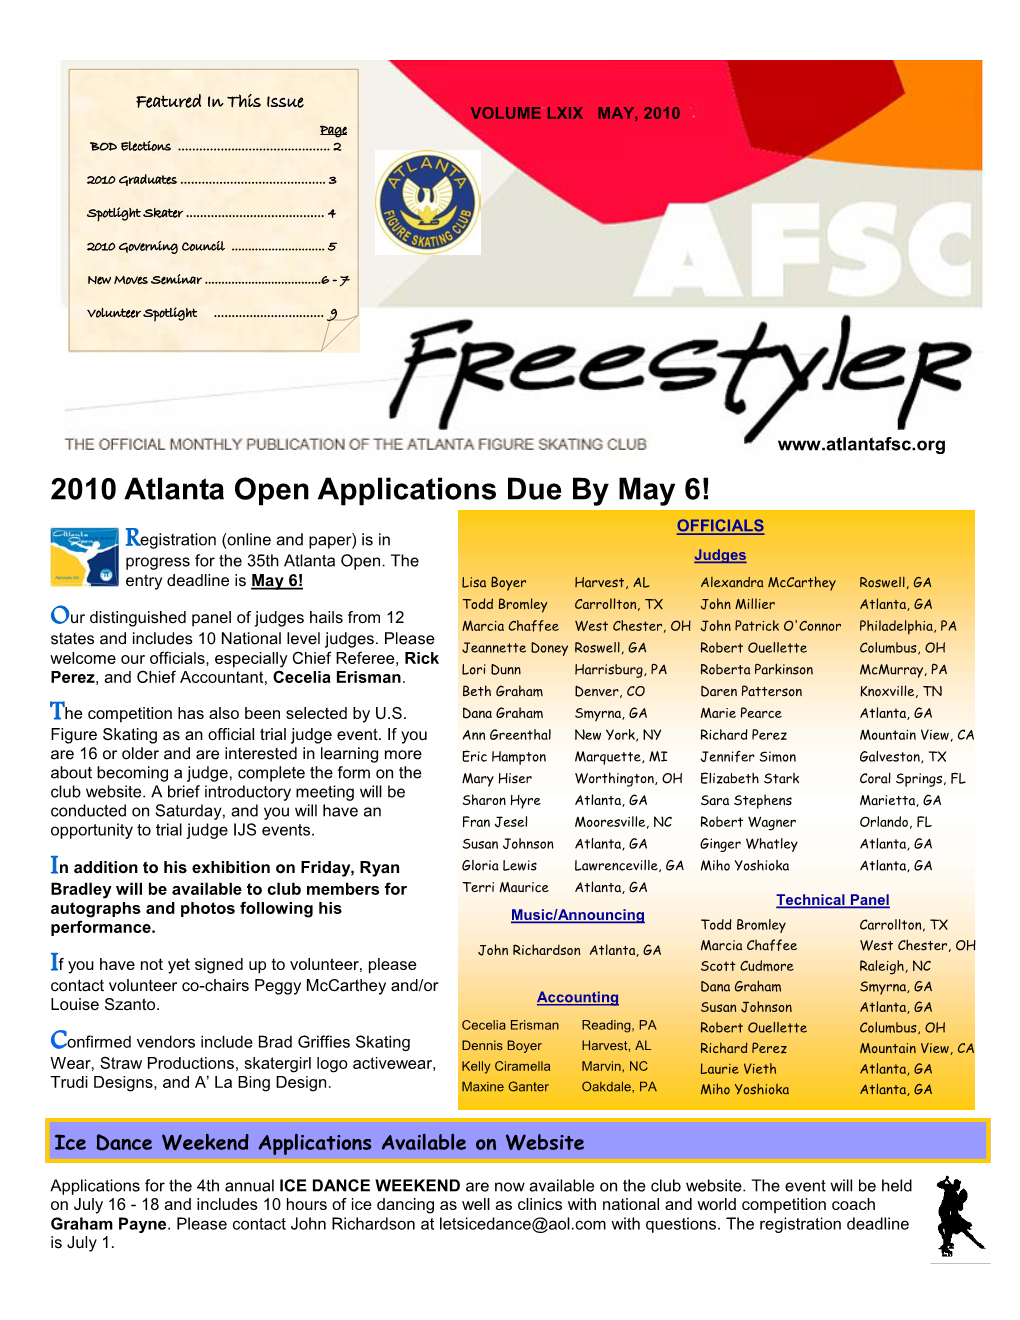 2010 Atlanta Open Applications Due by May 6! OFFICIALS Registration (Online and Paper) Is in Progress for the 35Th Atlanta Open